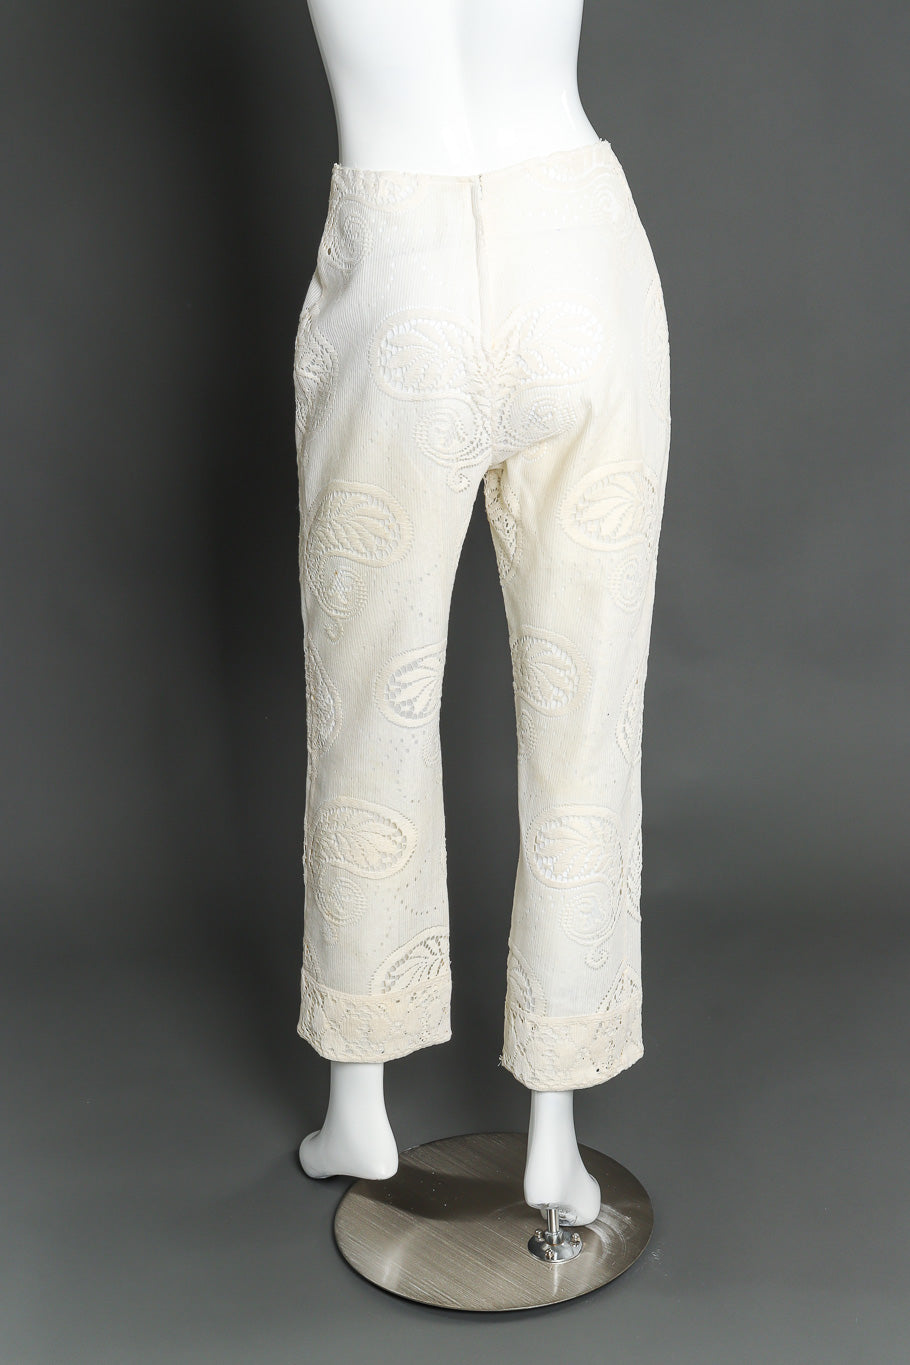 Rebecca for I. Magnin & Co. embroidered tunic and pants on mannequin @recessla